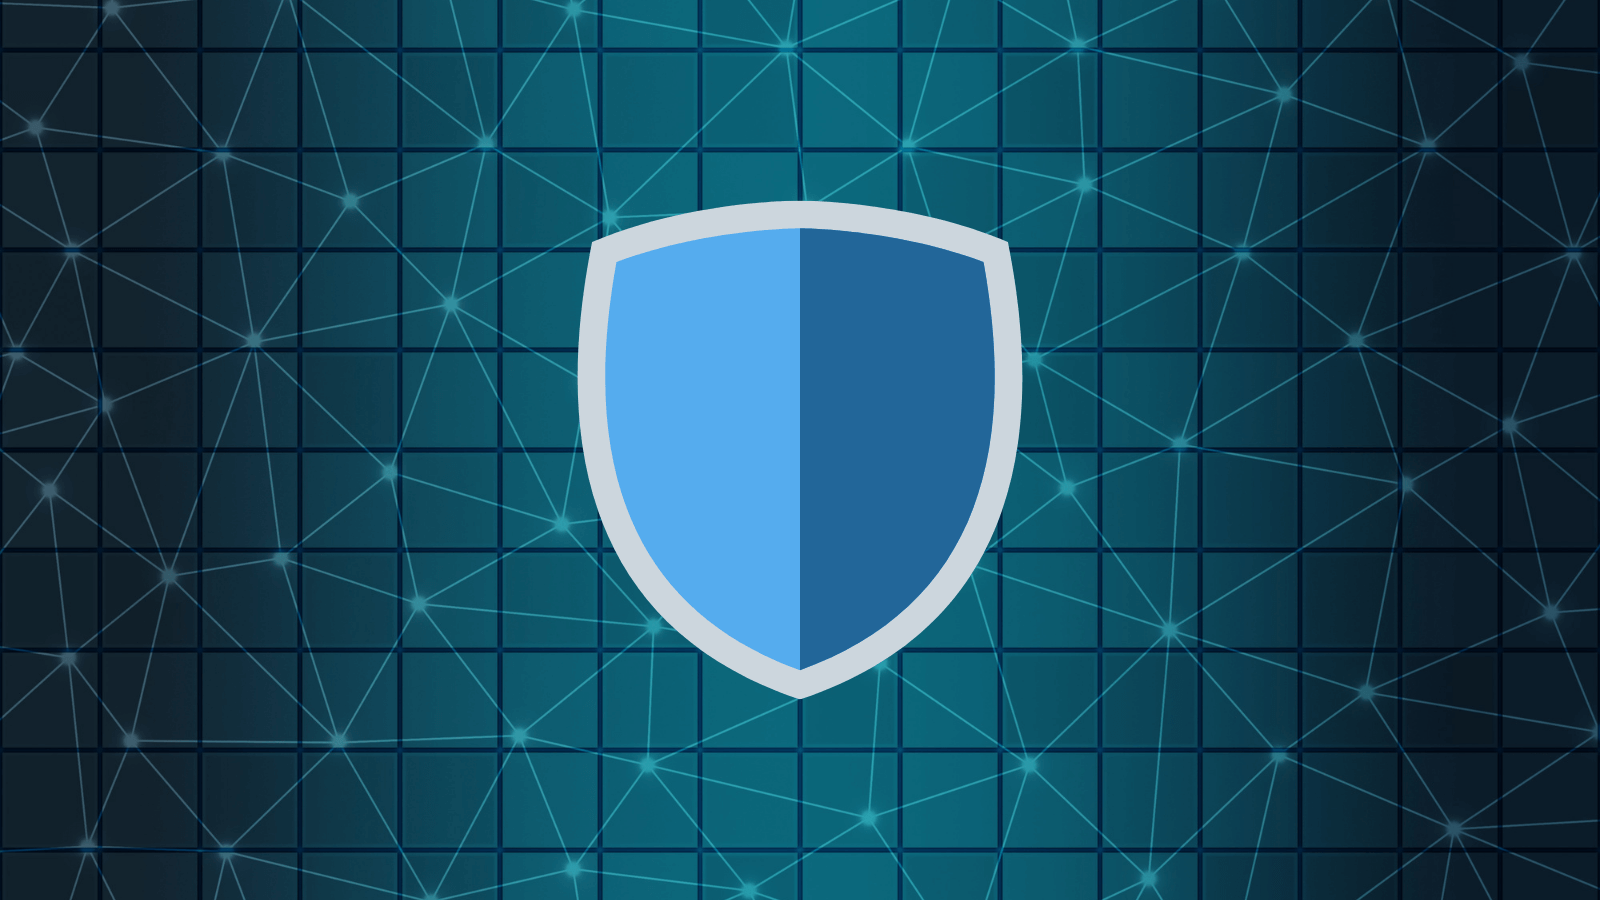 A shield icon over a geographic blue background